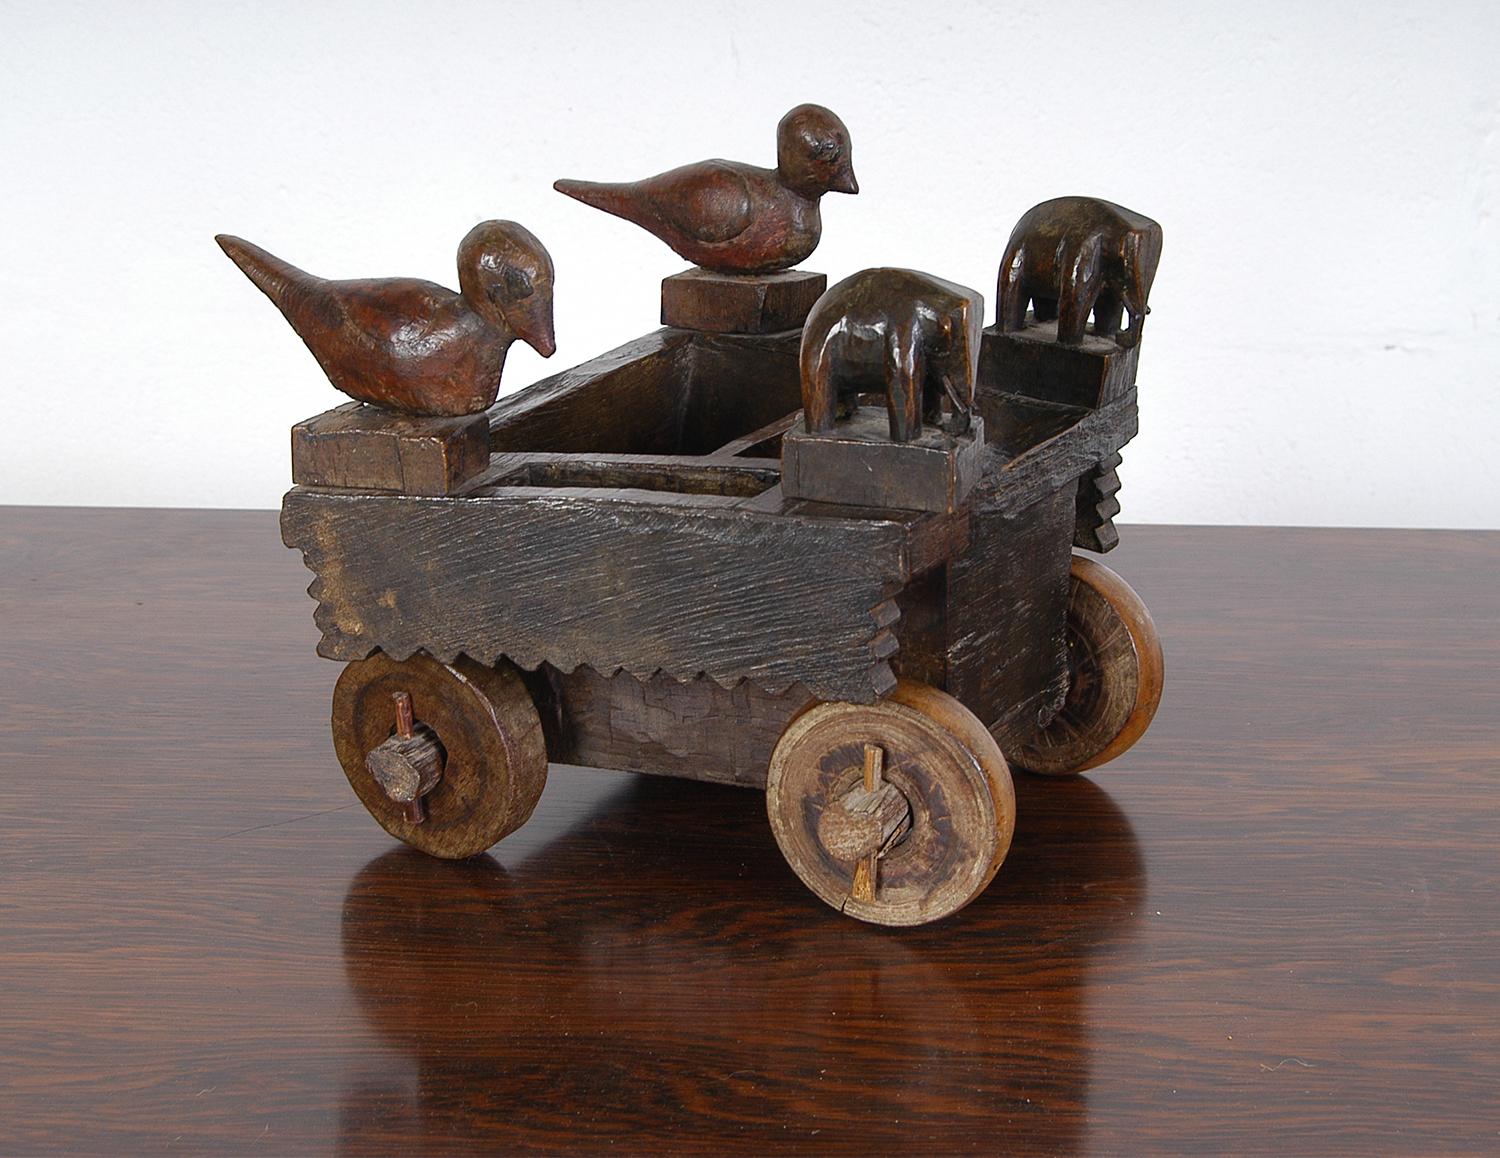 Charming naïve hand-crafted child’s toy decorated with beautifully stylised carved animals in the form of birds and elephants. The birds pivot a little on their wooden dowels and the wheels turn with ease. Judging by the variants in colour it's made